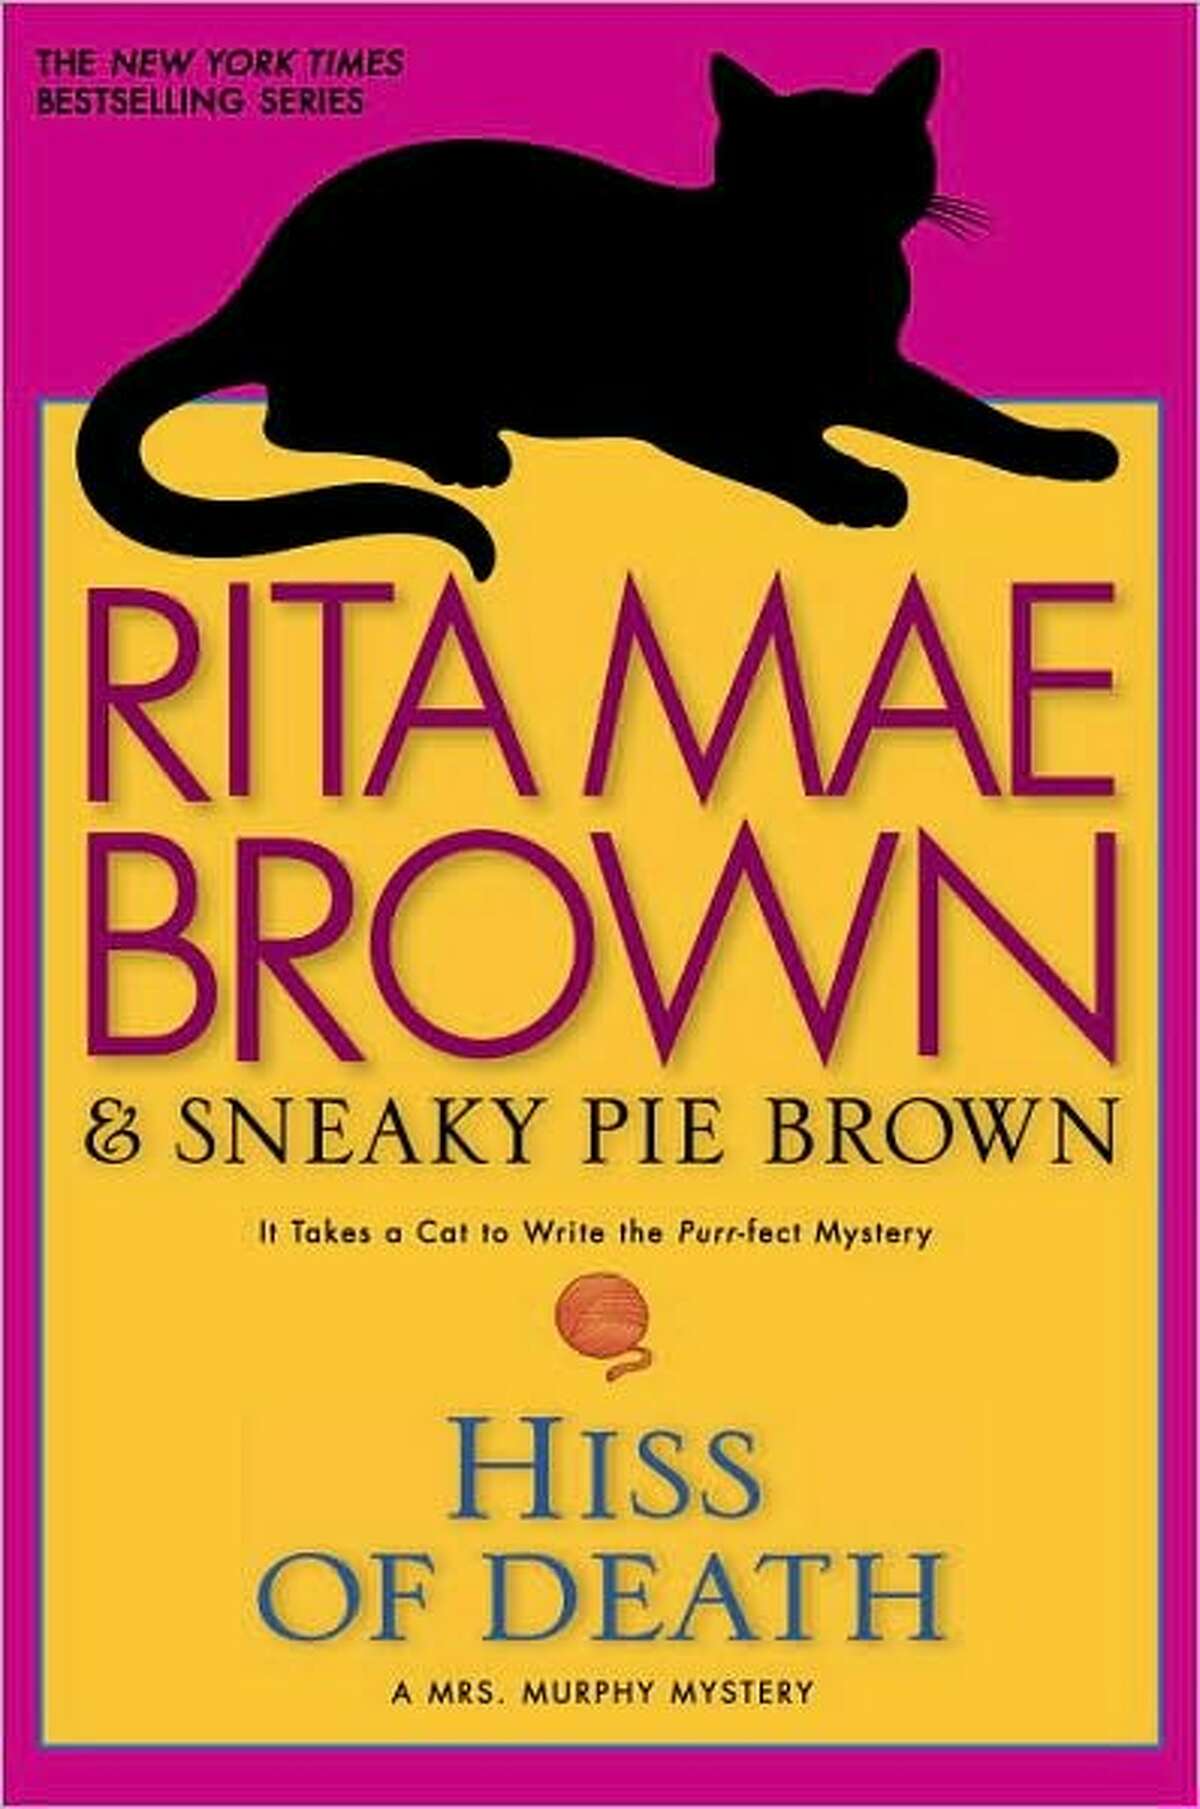 Hiss of Death by Rita Mae Brown and Sneaky Pie Brown. No. 19 in Mrs. Murphy Mystery series